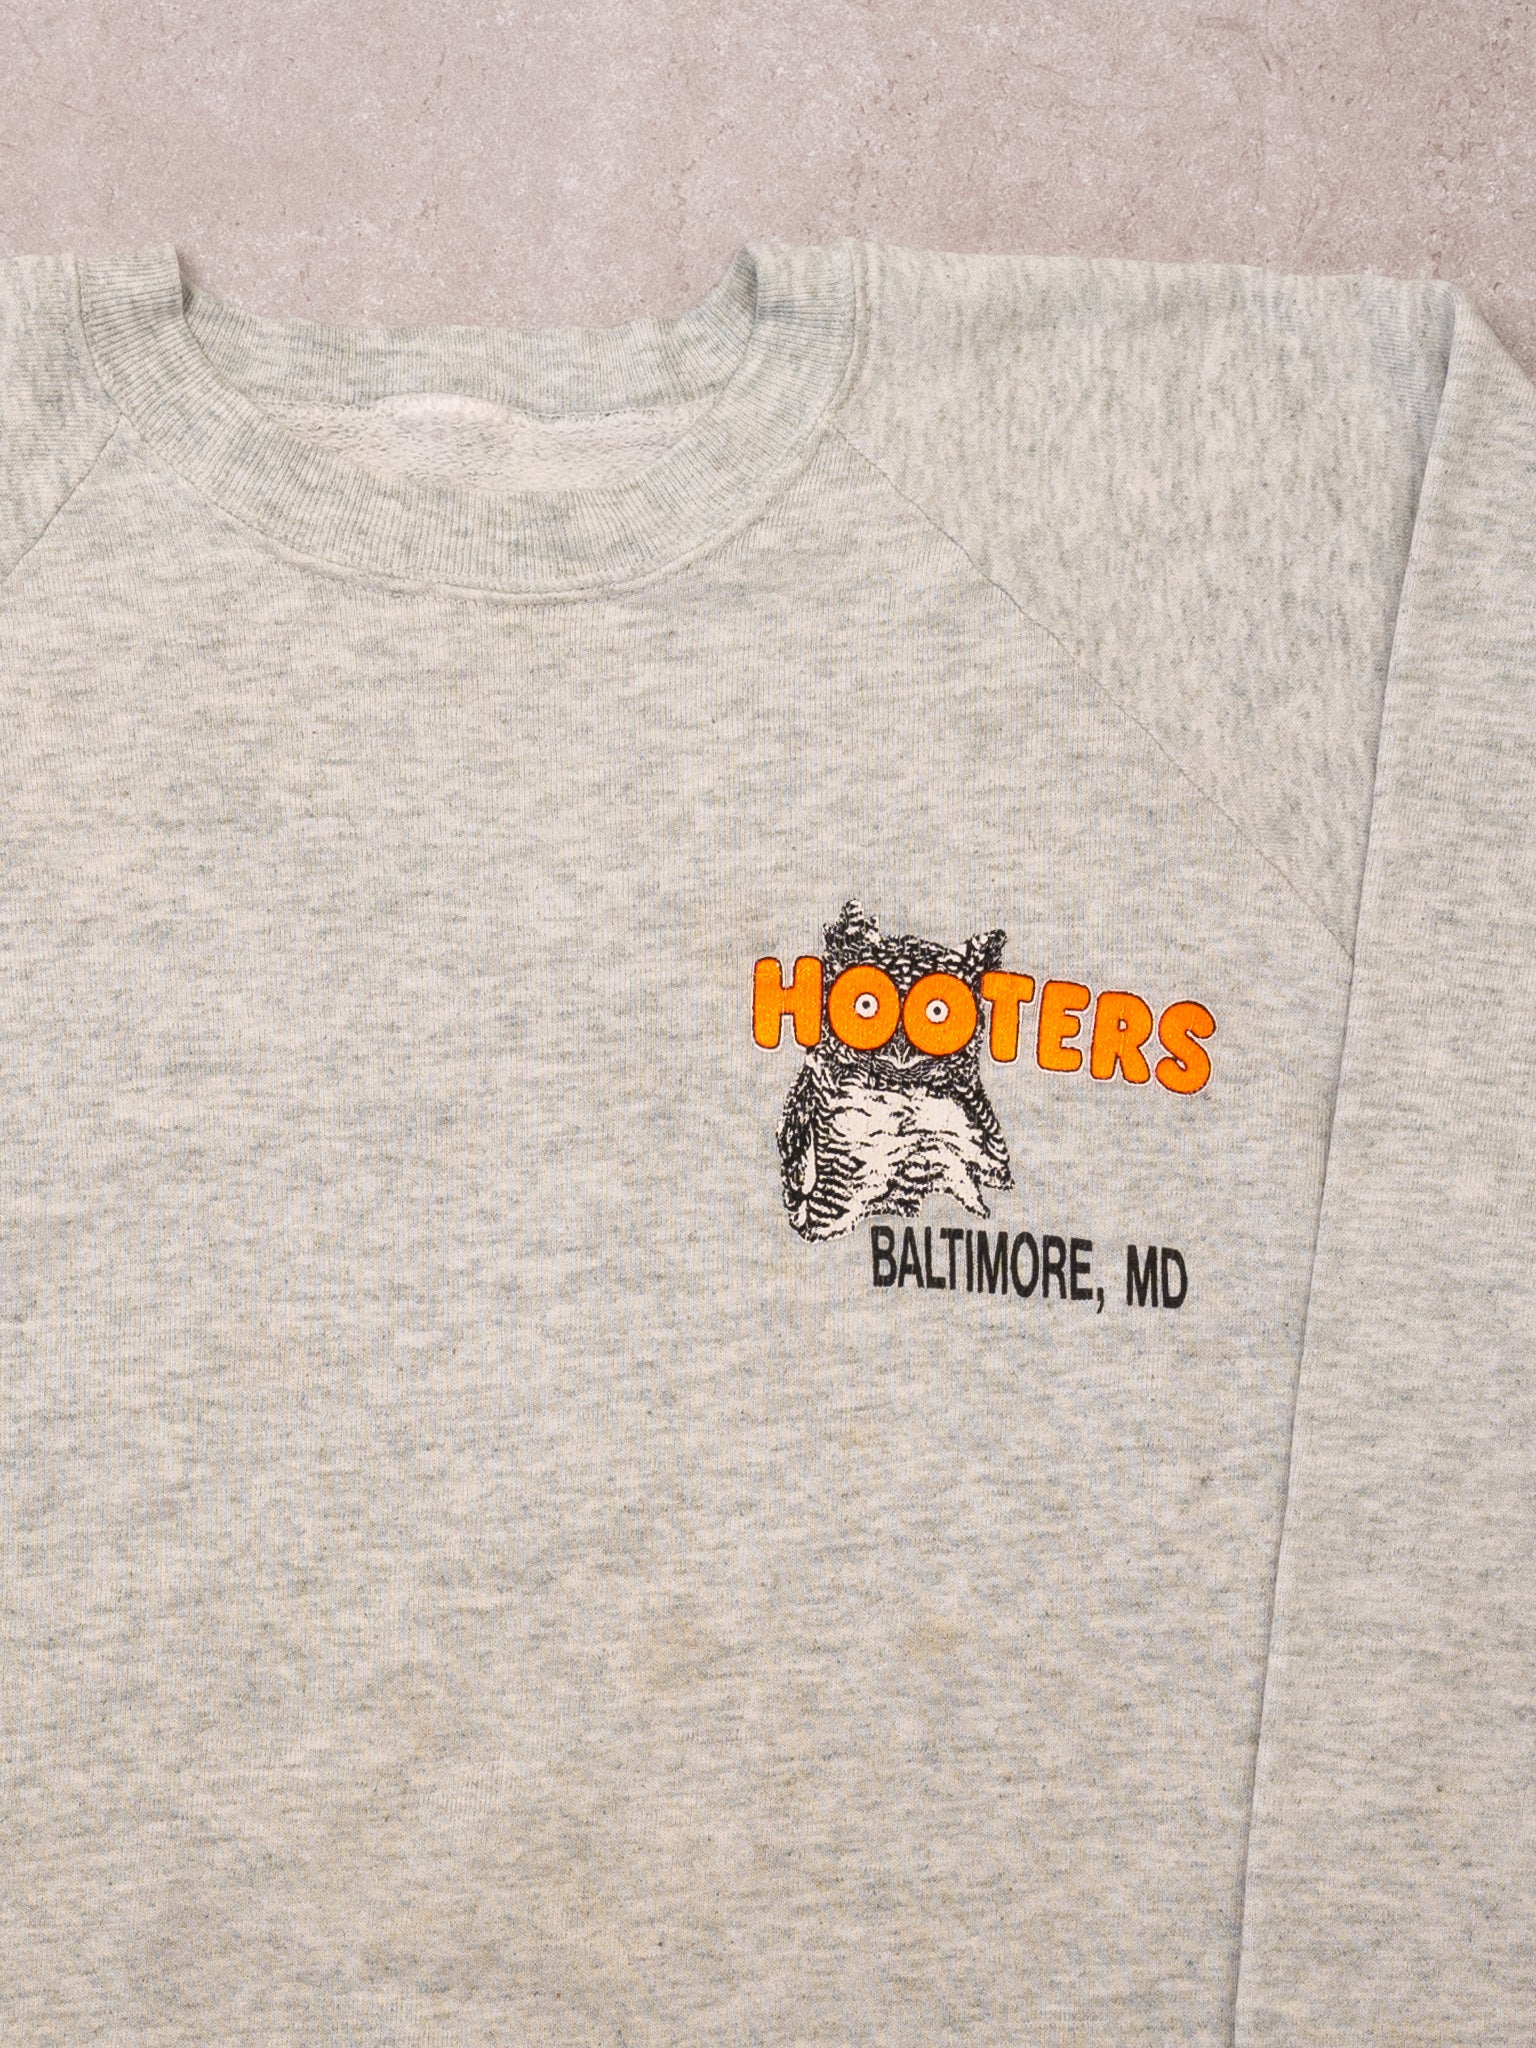 Vintage '90 Hooters Balitmore MD ' A little lost'  Crewneck (L)